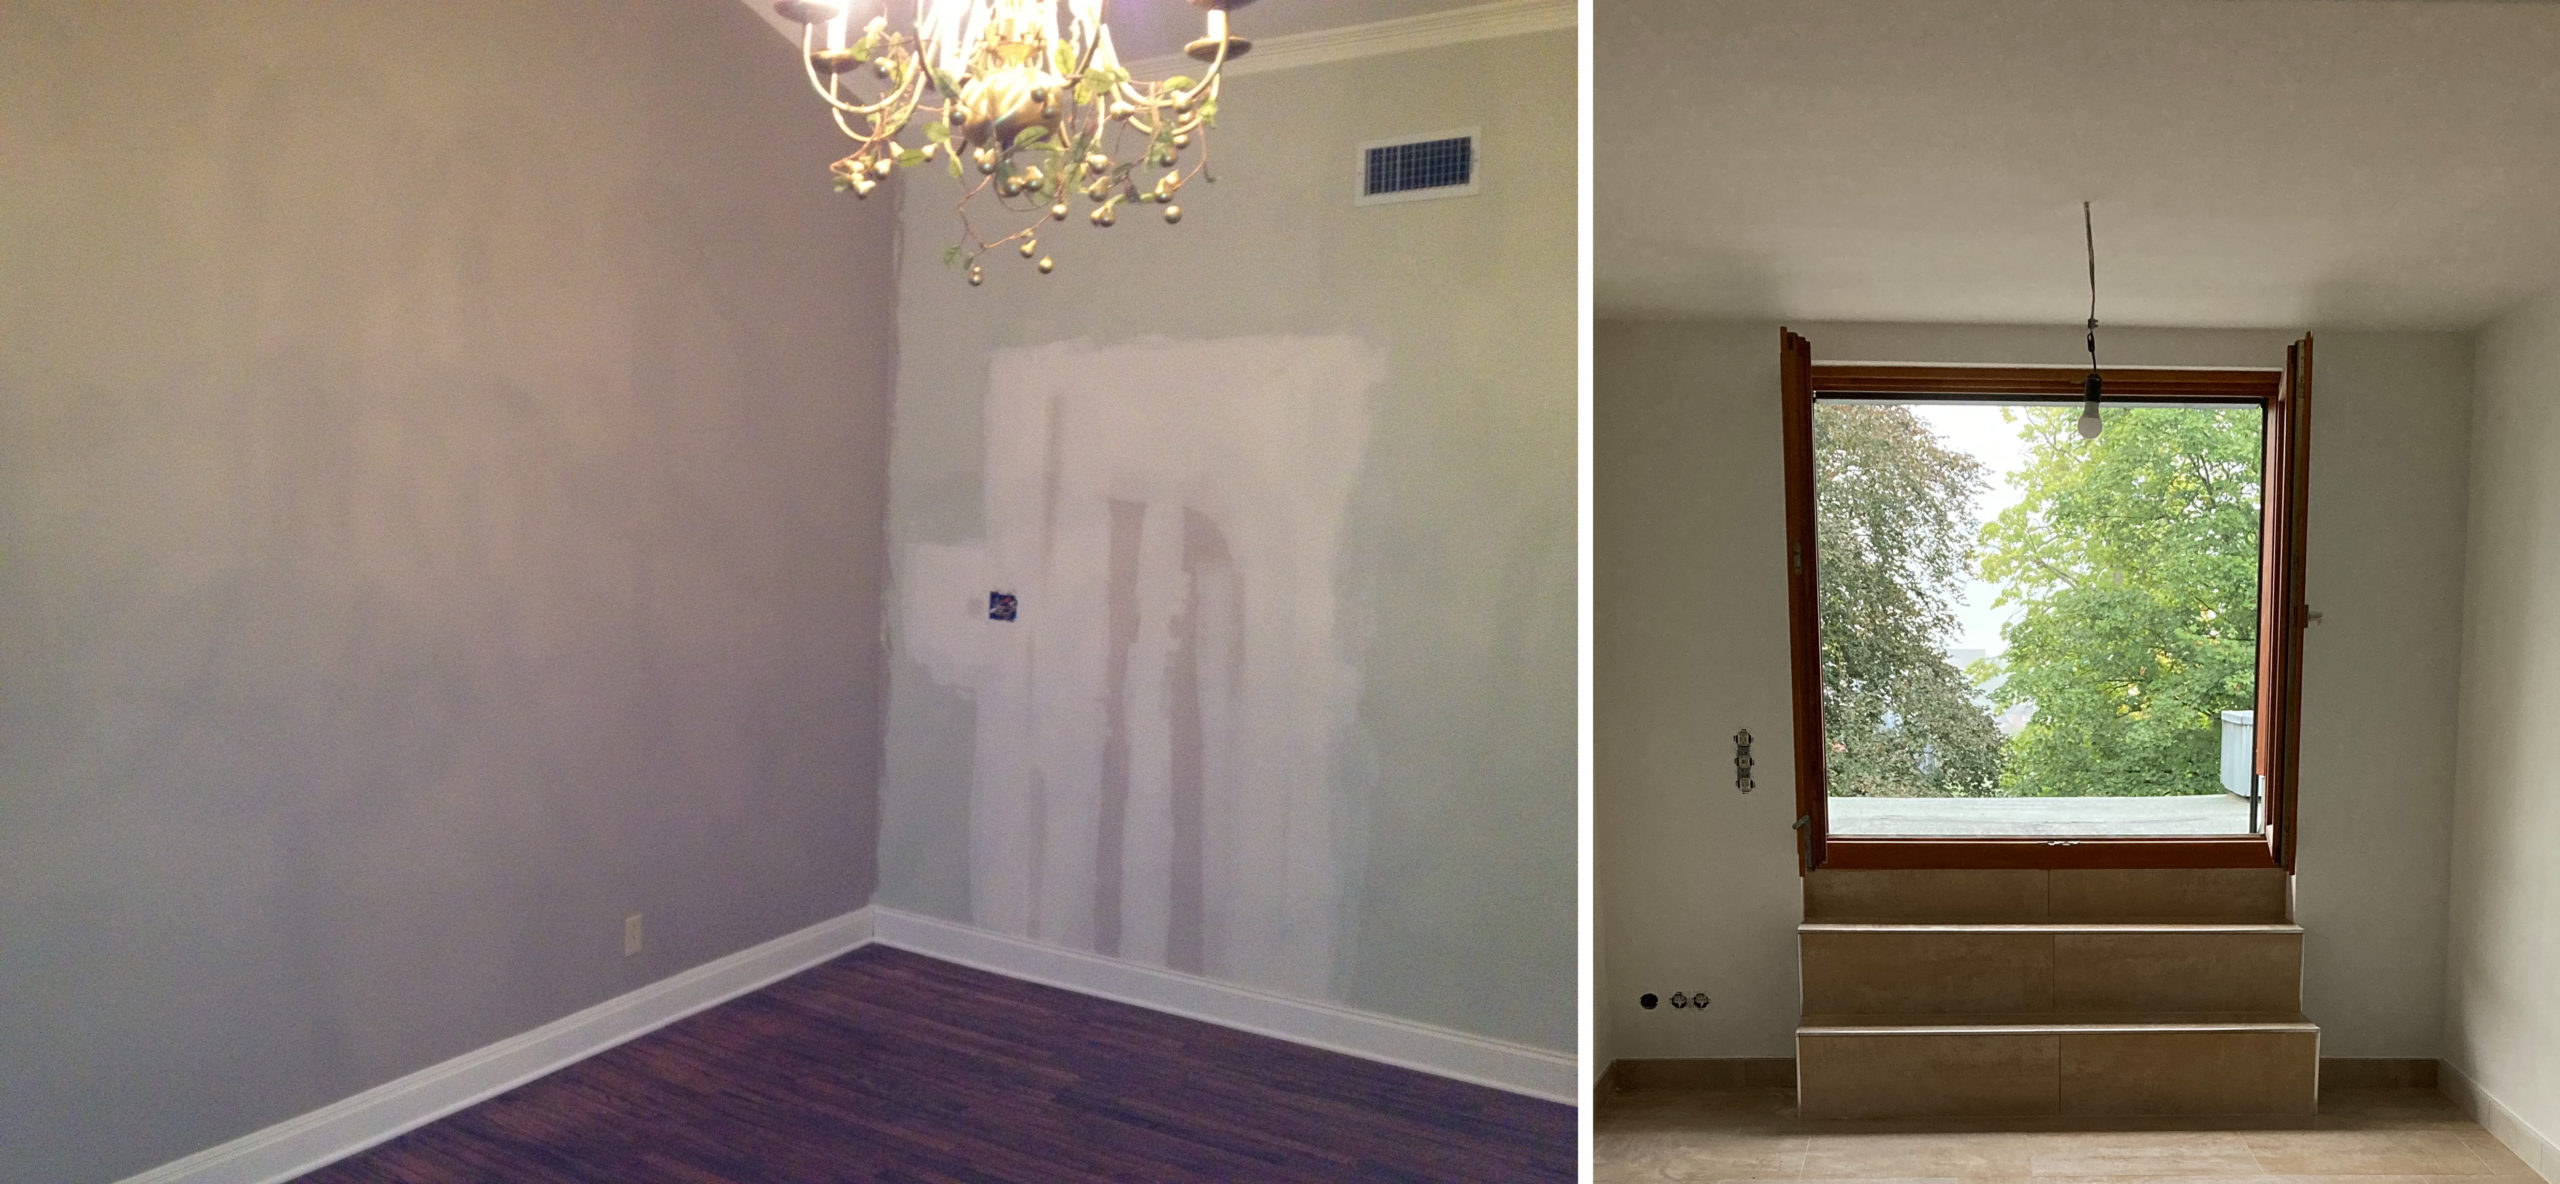 Left: A corner of an empty dining room with a previously existing doorway patched to create a solid wall, with a chandelier hanging in the center of the room. Right: A room with three stairs leading to a doorway opening to a rooftop with greenery.